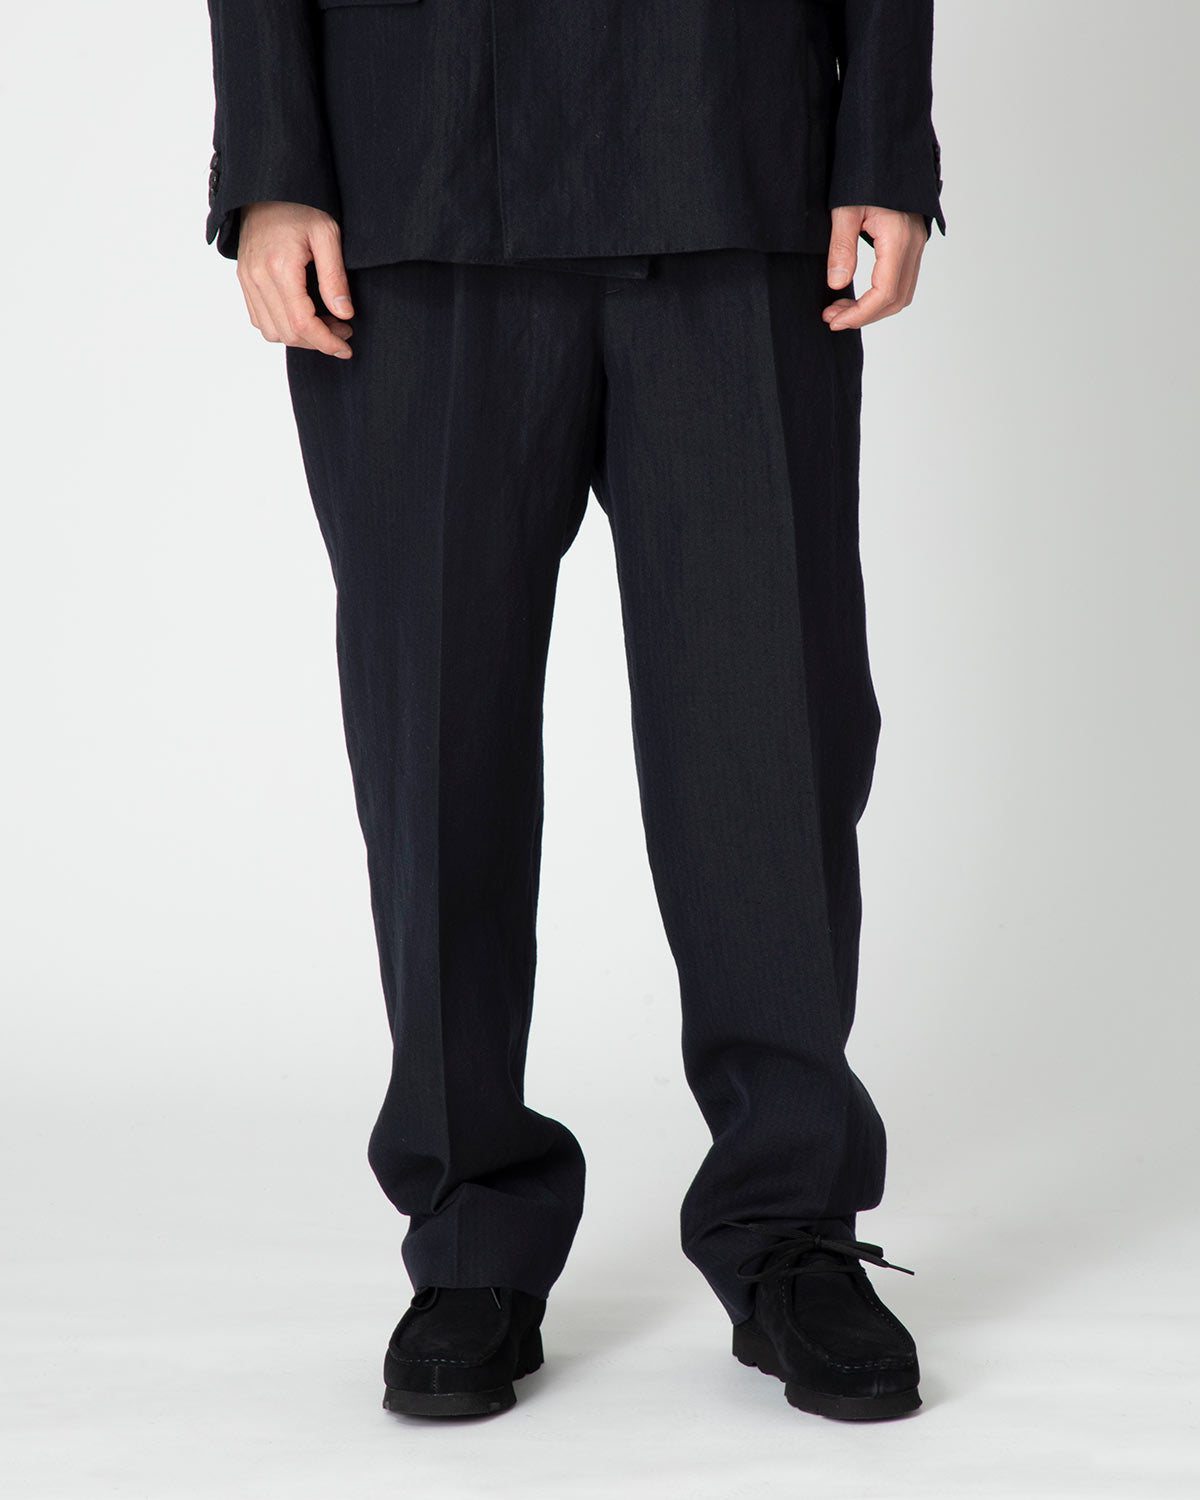 Ame Suiting Wide Leg Trouser Black